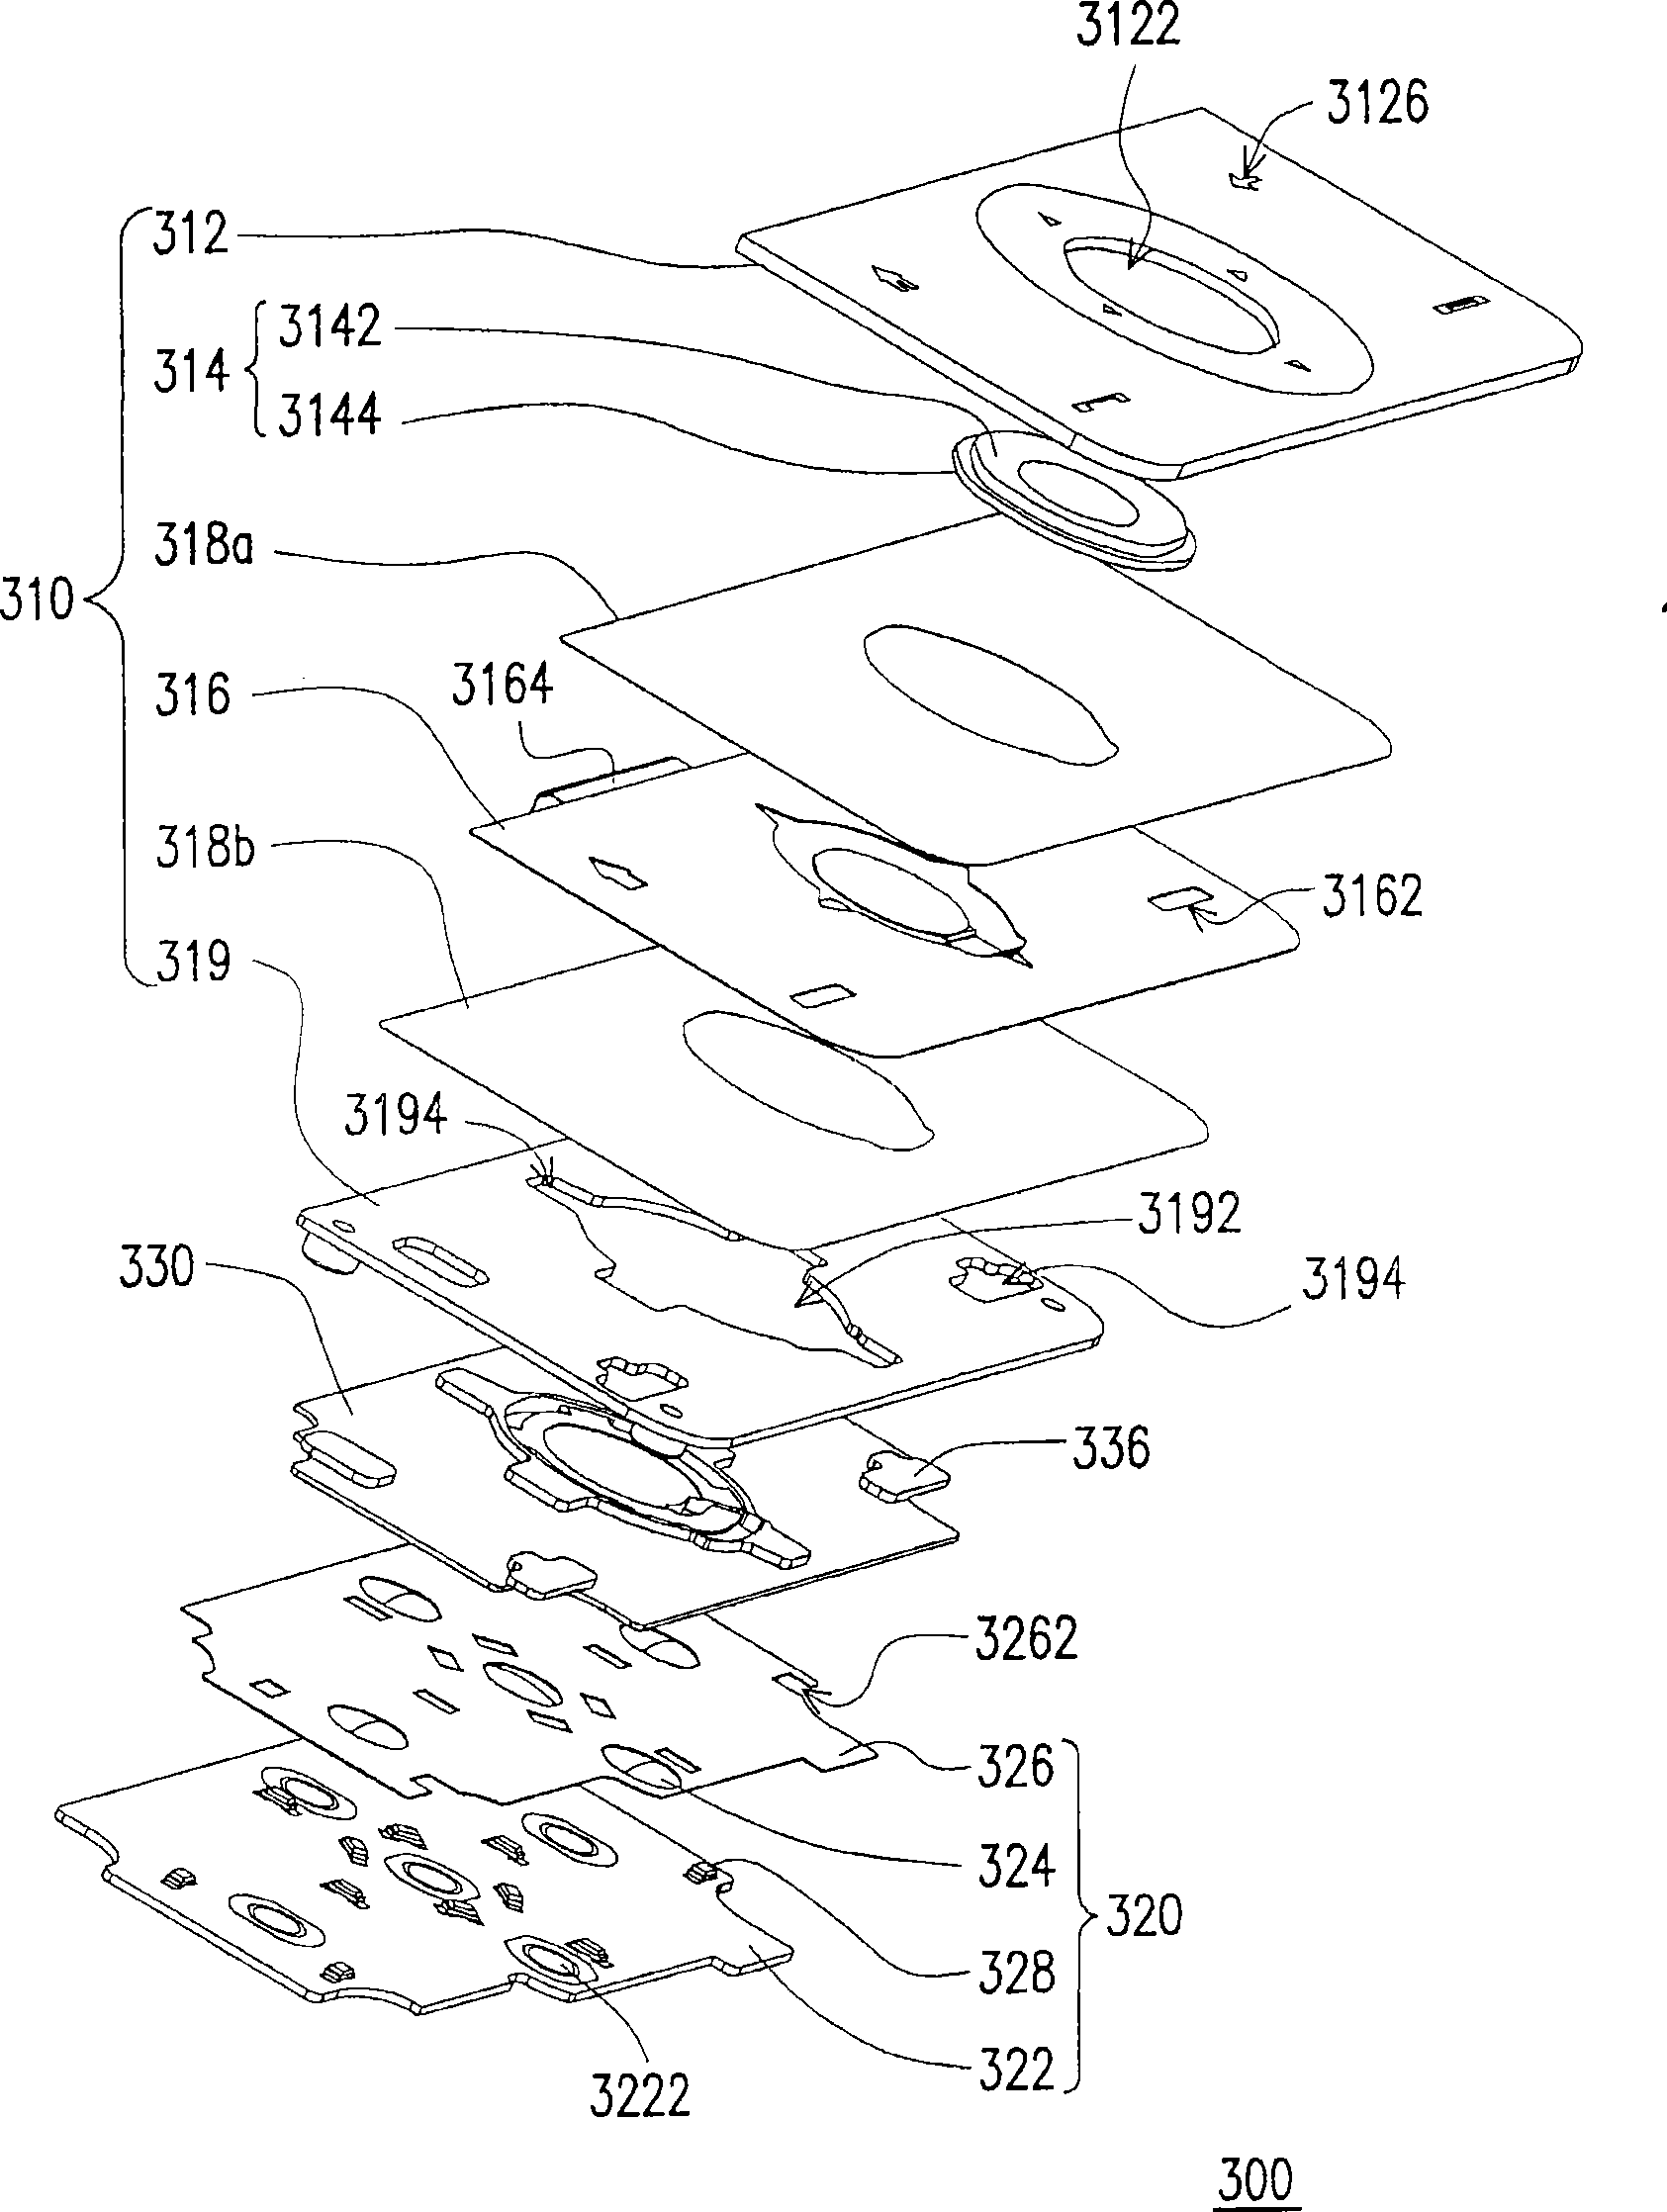 Input panel and portable electronic device using the input panel